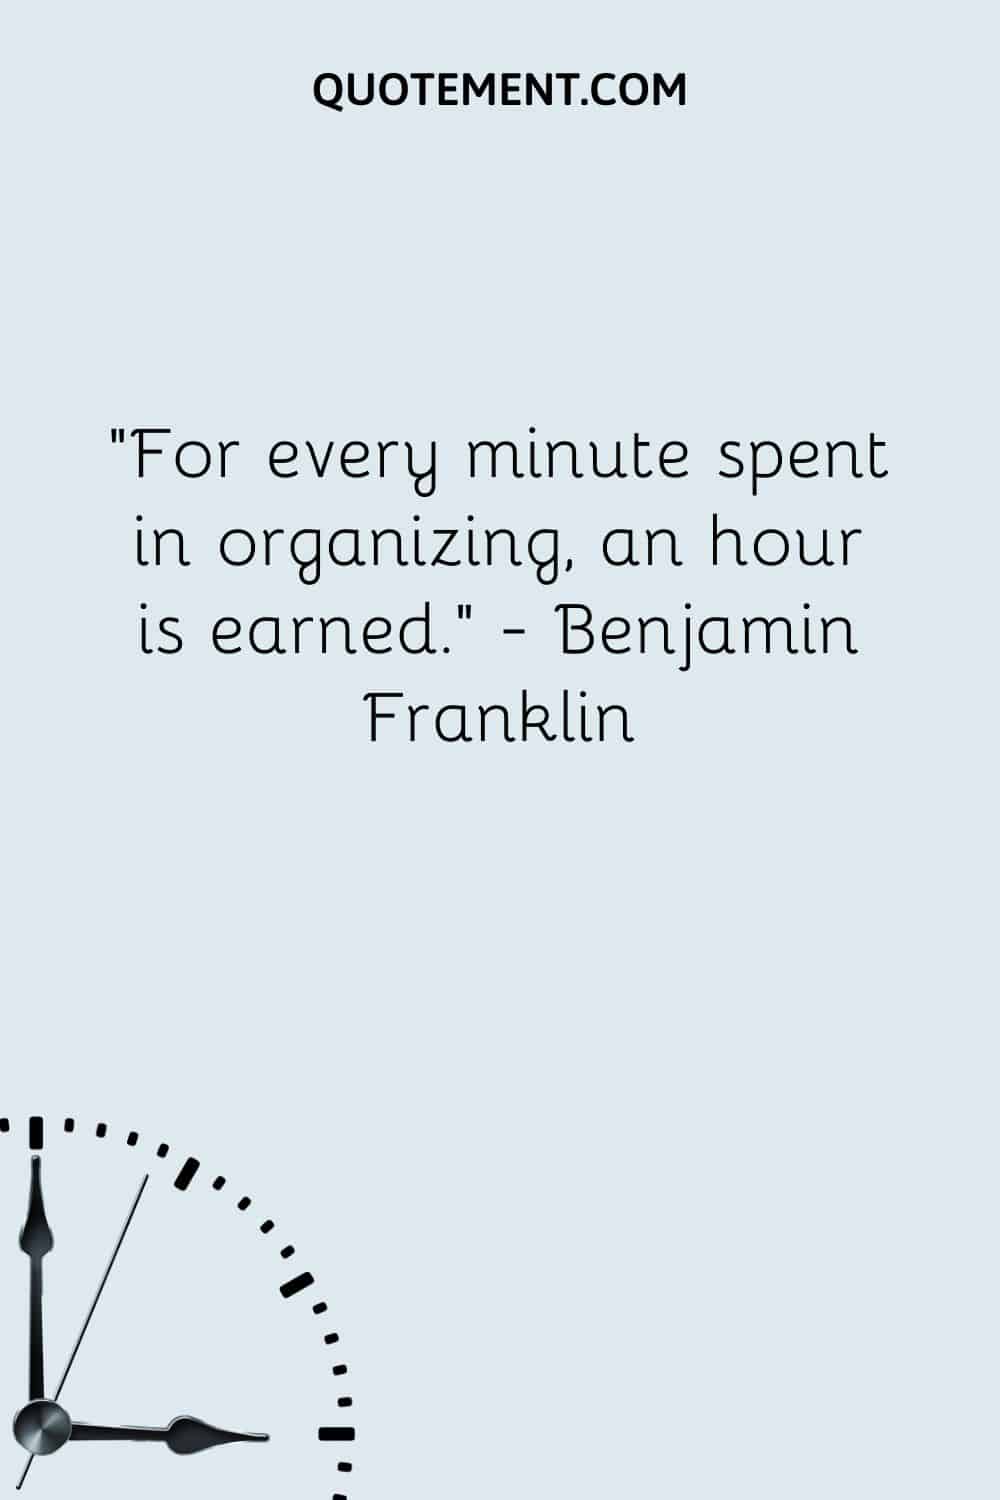 For every minute spent in organizing, an hour is earned